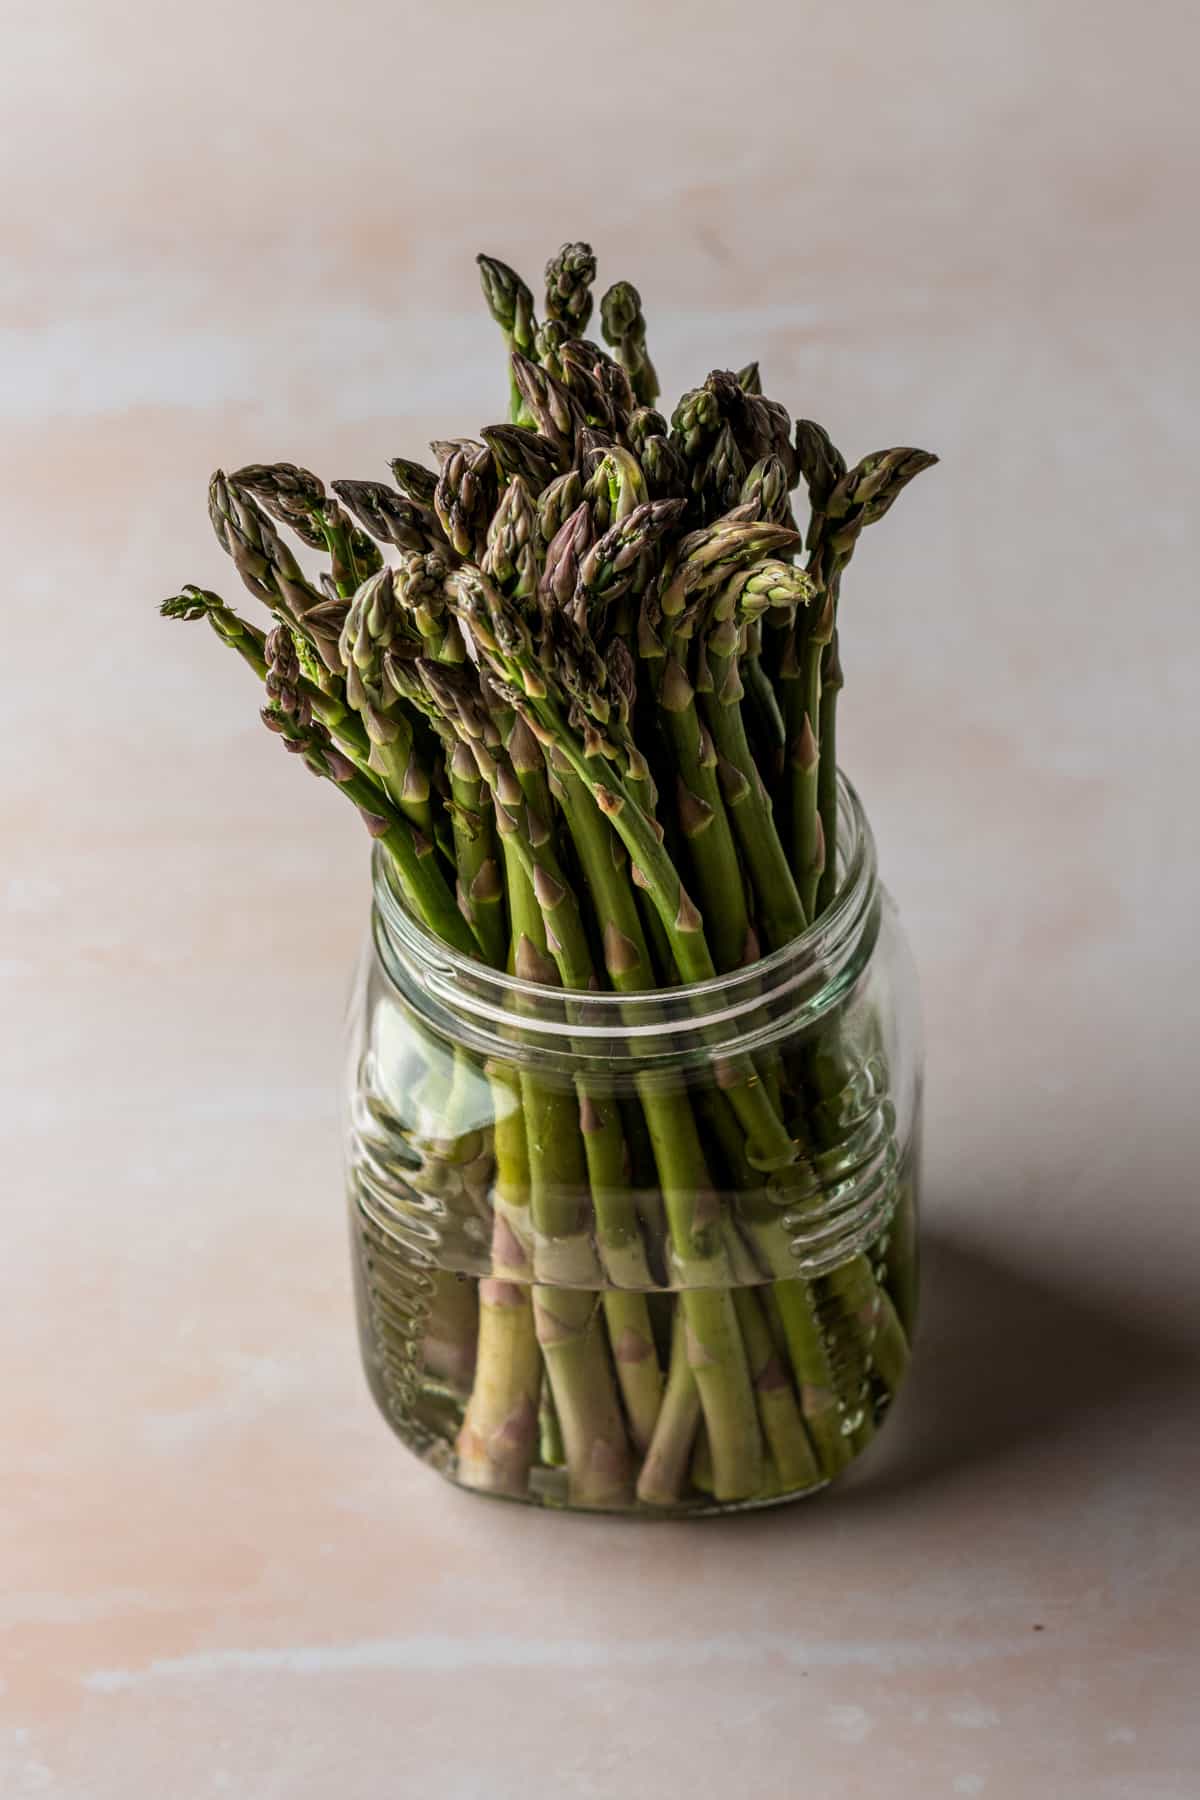 Stalks of asparagus in a large glass jar filled with water.